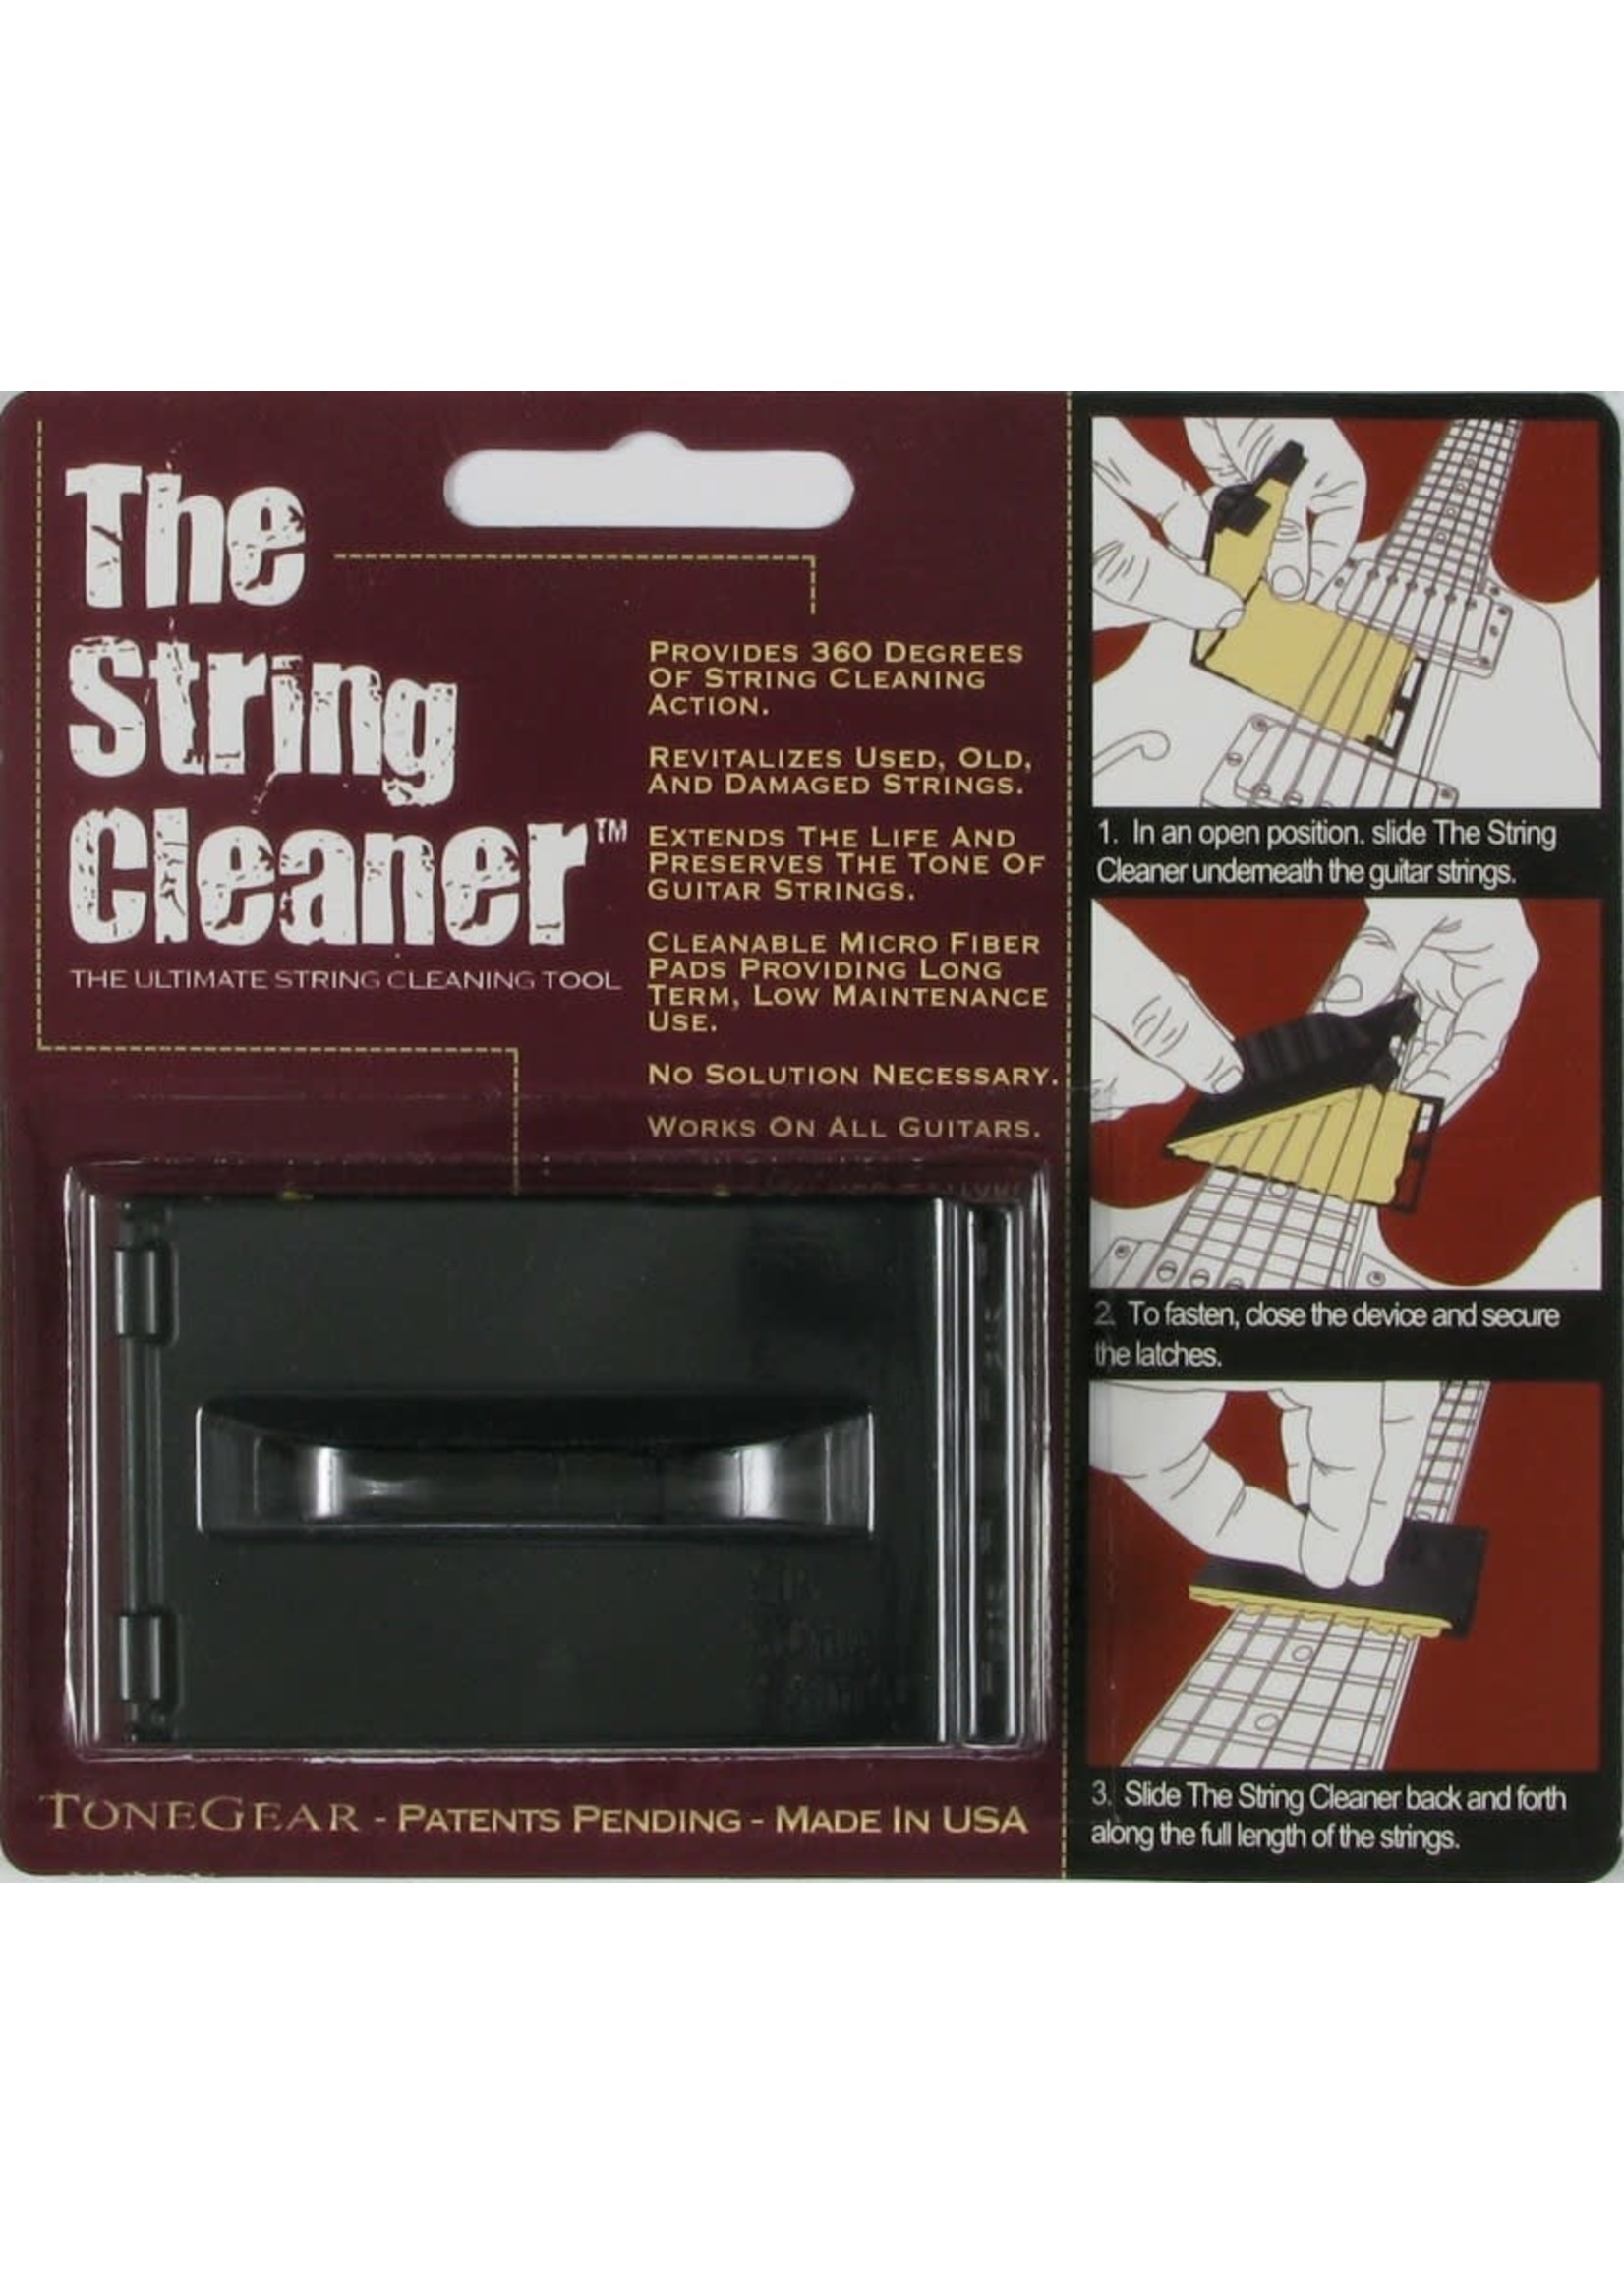 GUITAR STRING CLEANER + $5 Shipping